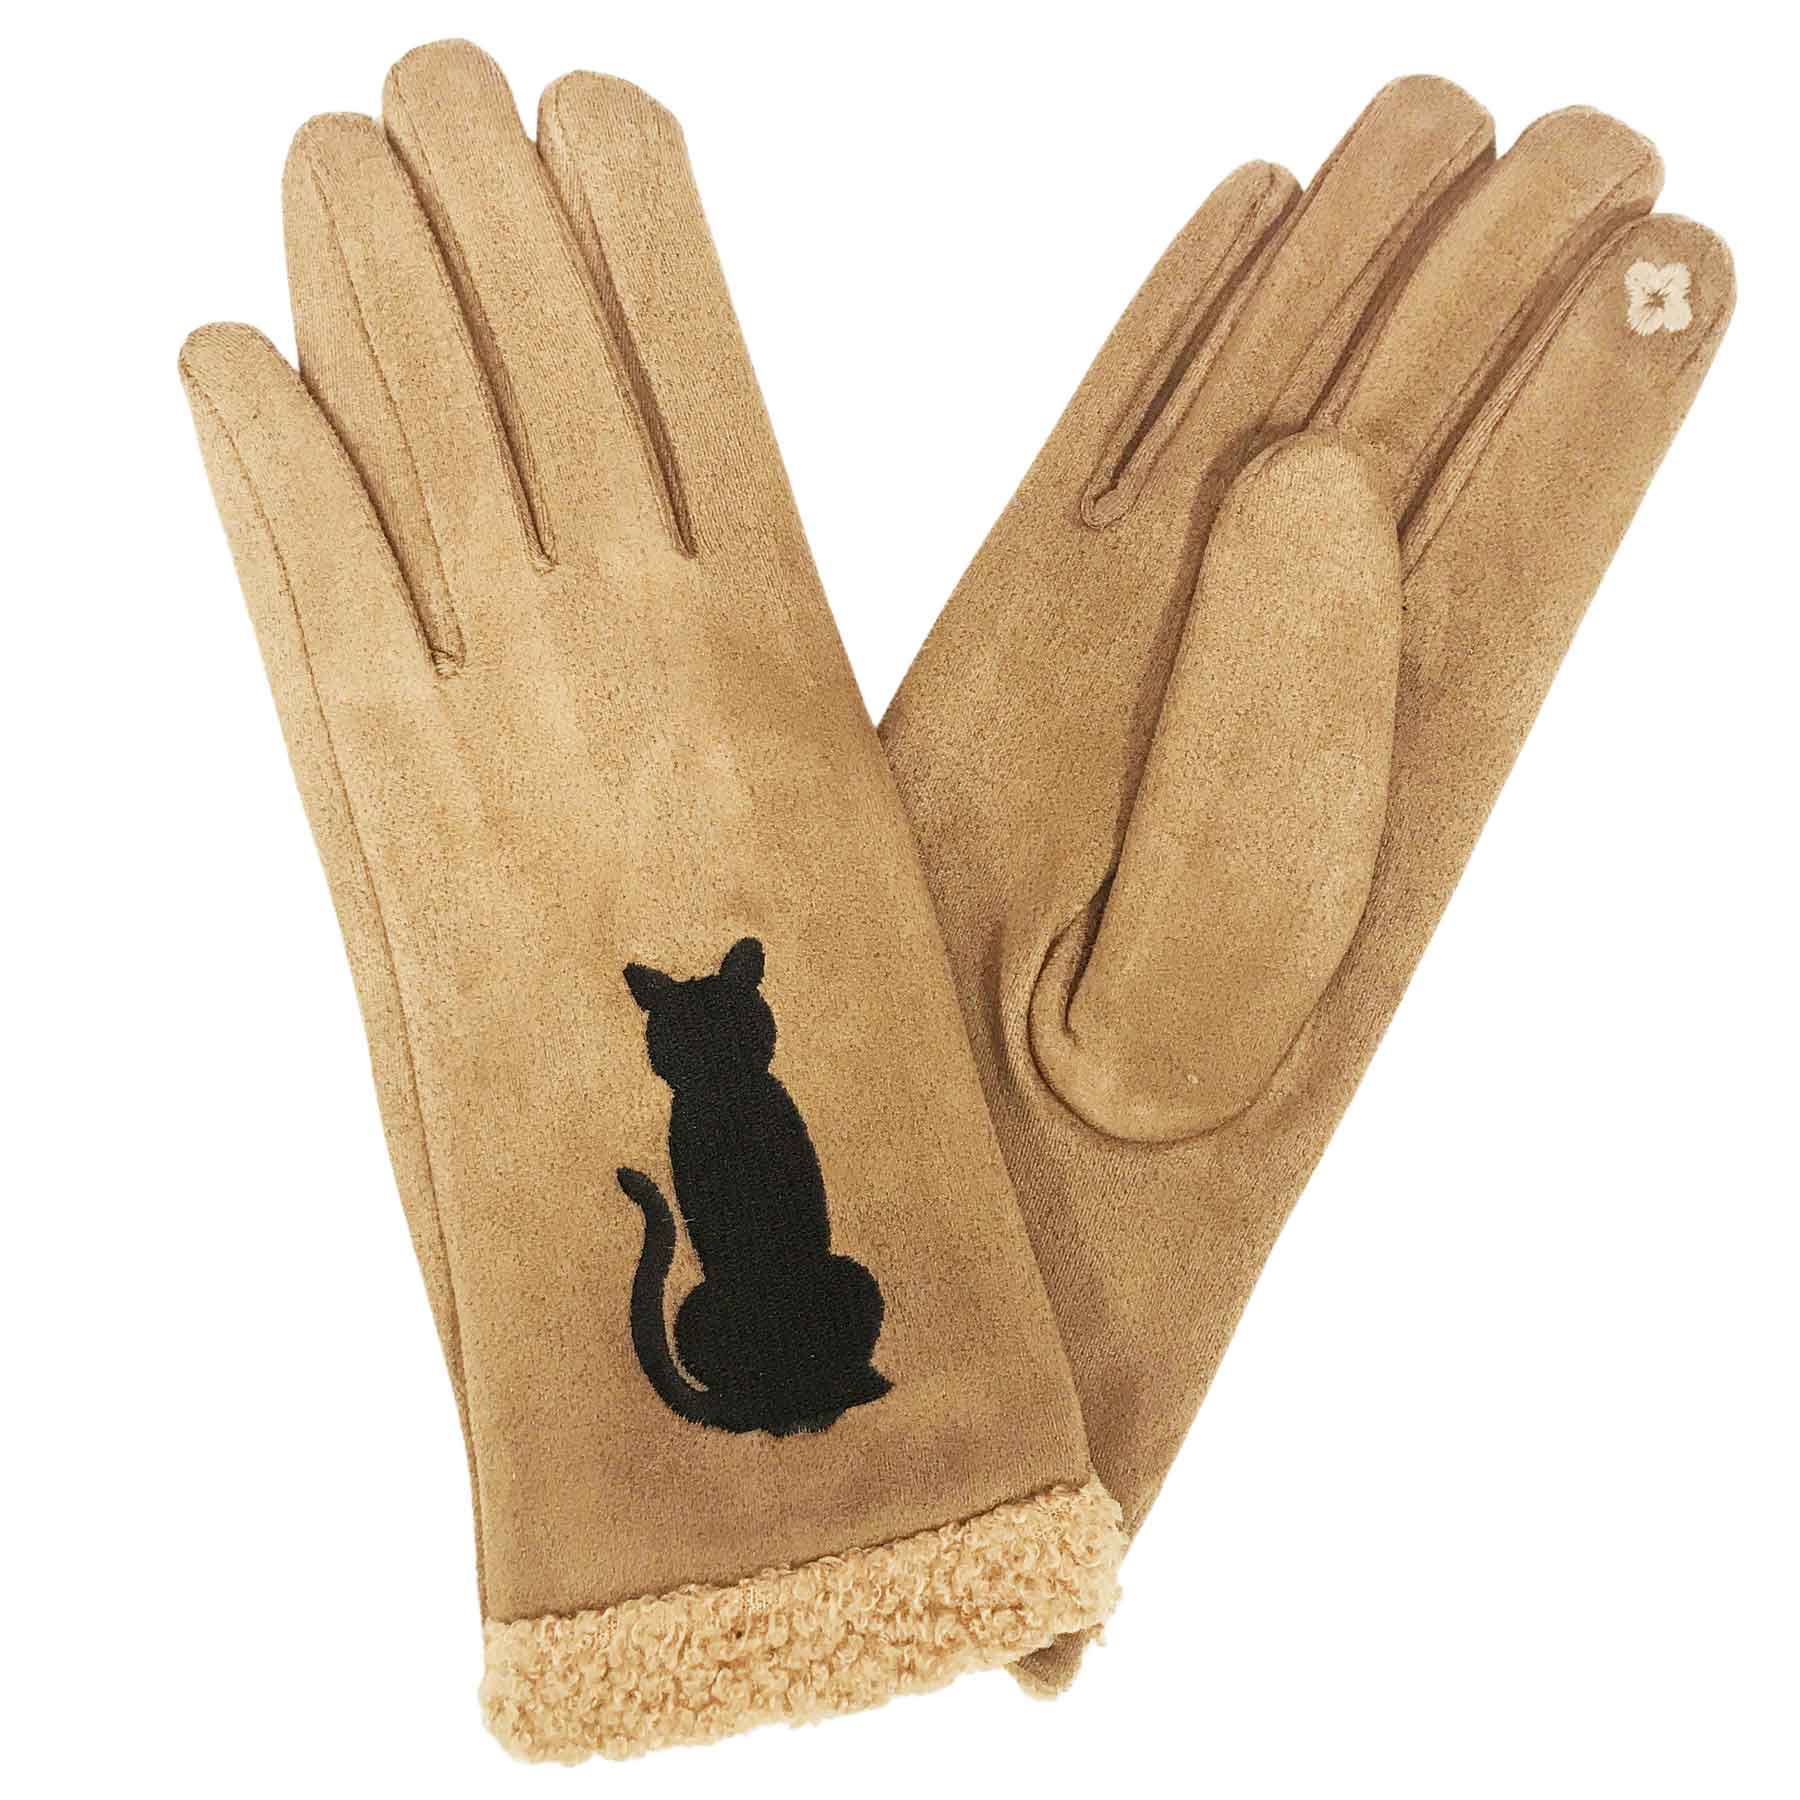 1229 - Camel Cat Silhouette <br>
Touch Screen Smart Gloves